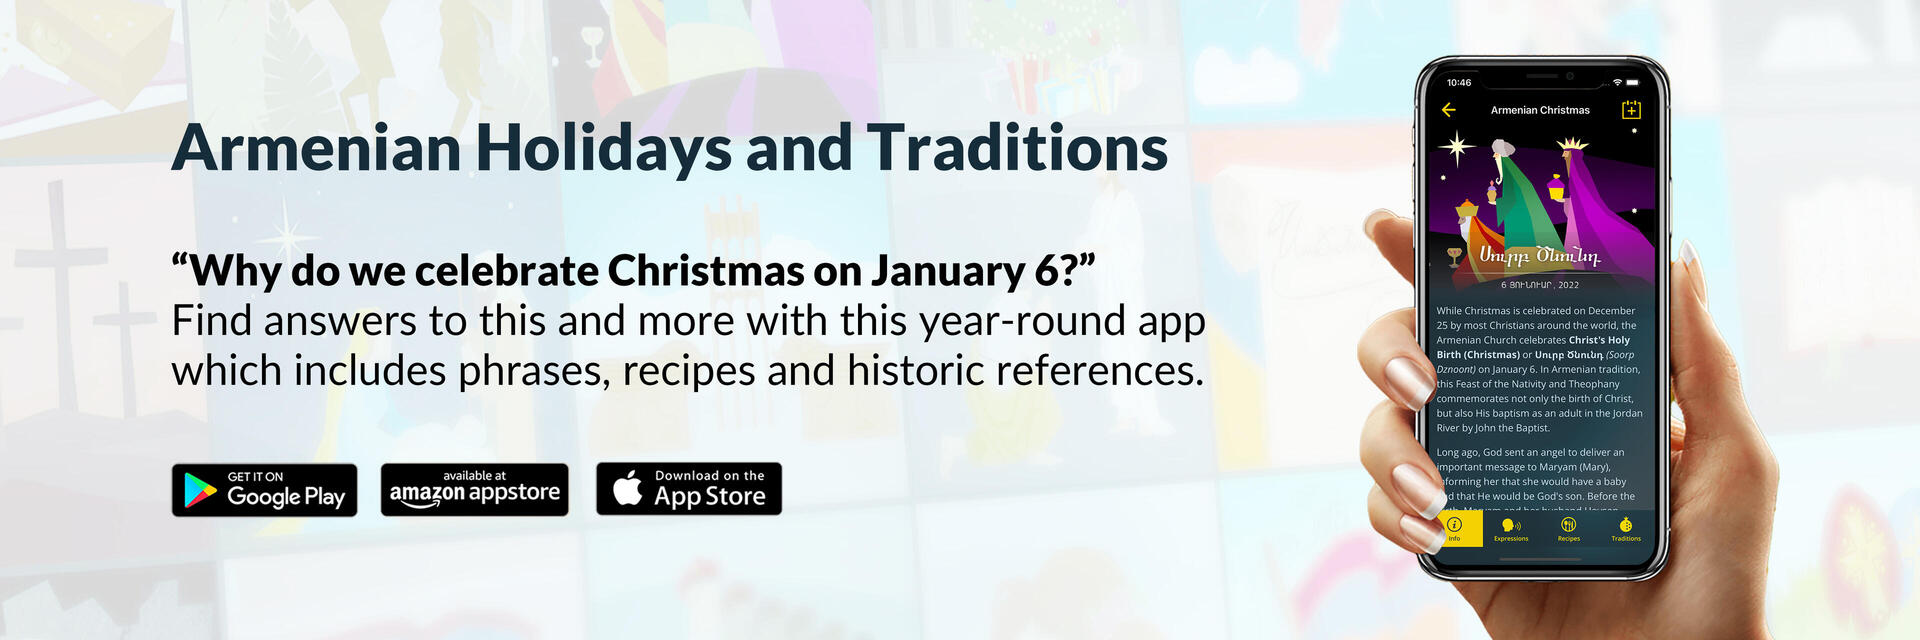 The app features a full calendar year of the most popular holidays celebrated in Armenia and around the world.